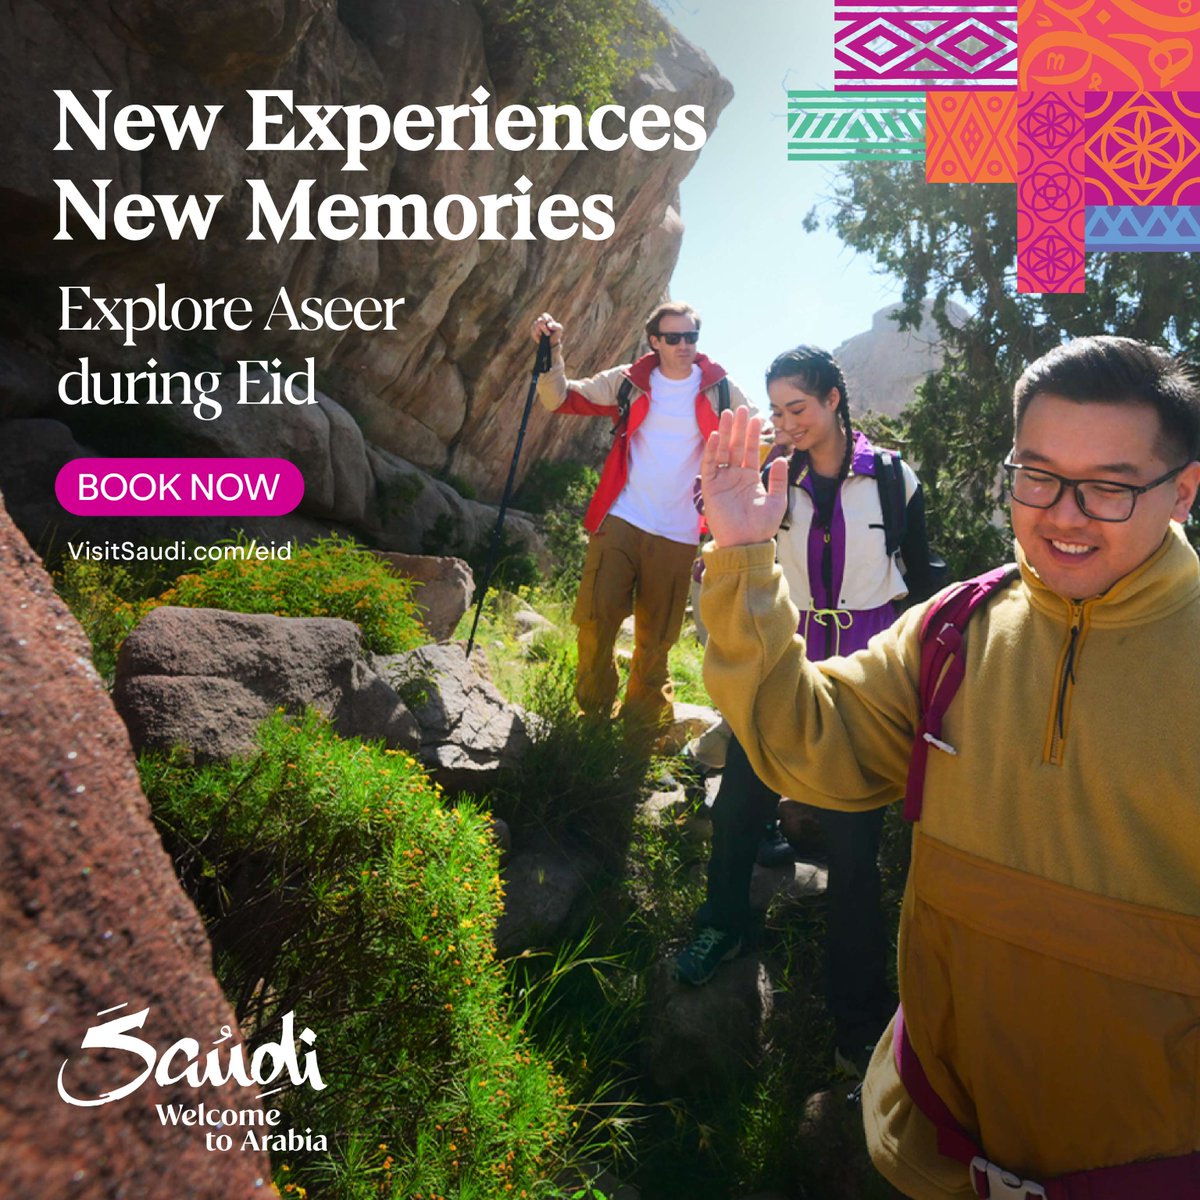 Revel in the joy of Eid with a backdrop of Aseer's stunning landscapes! 🏔️ 🌟 Your unforgettable Eid moments await in Saudi. Check out visitsaudi.com/en/eid for all event details. #EidInAseer #SaudiEid #VisitSaudi